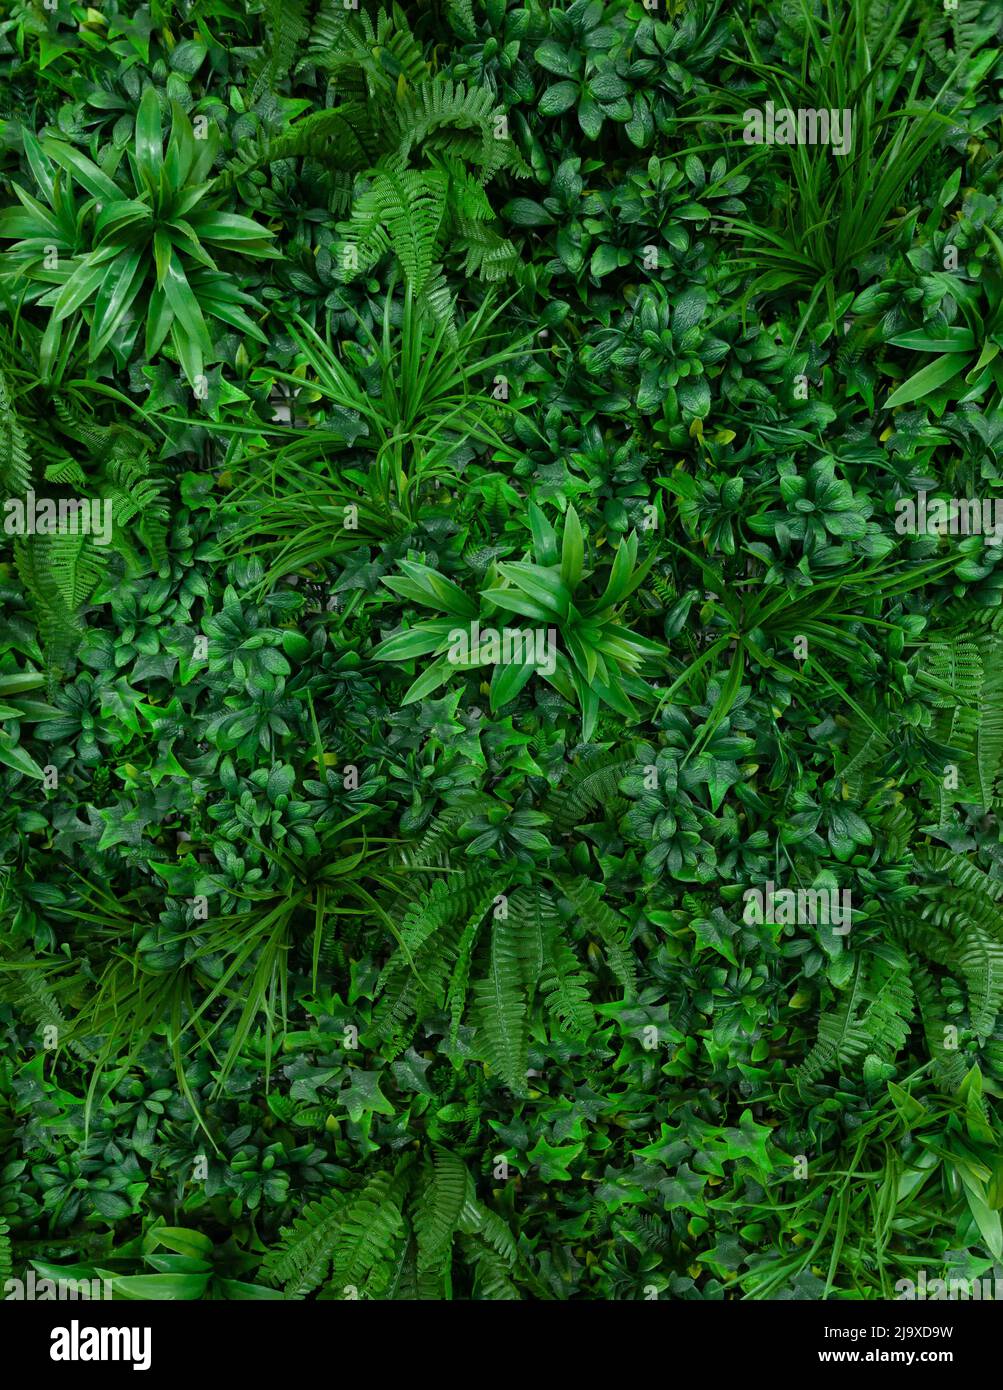 Natural background with tropical green leaves. Abstract nature pattern with tropical texture. Stock Photo